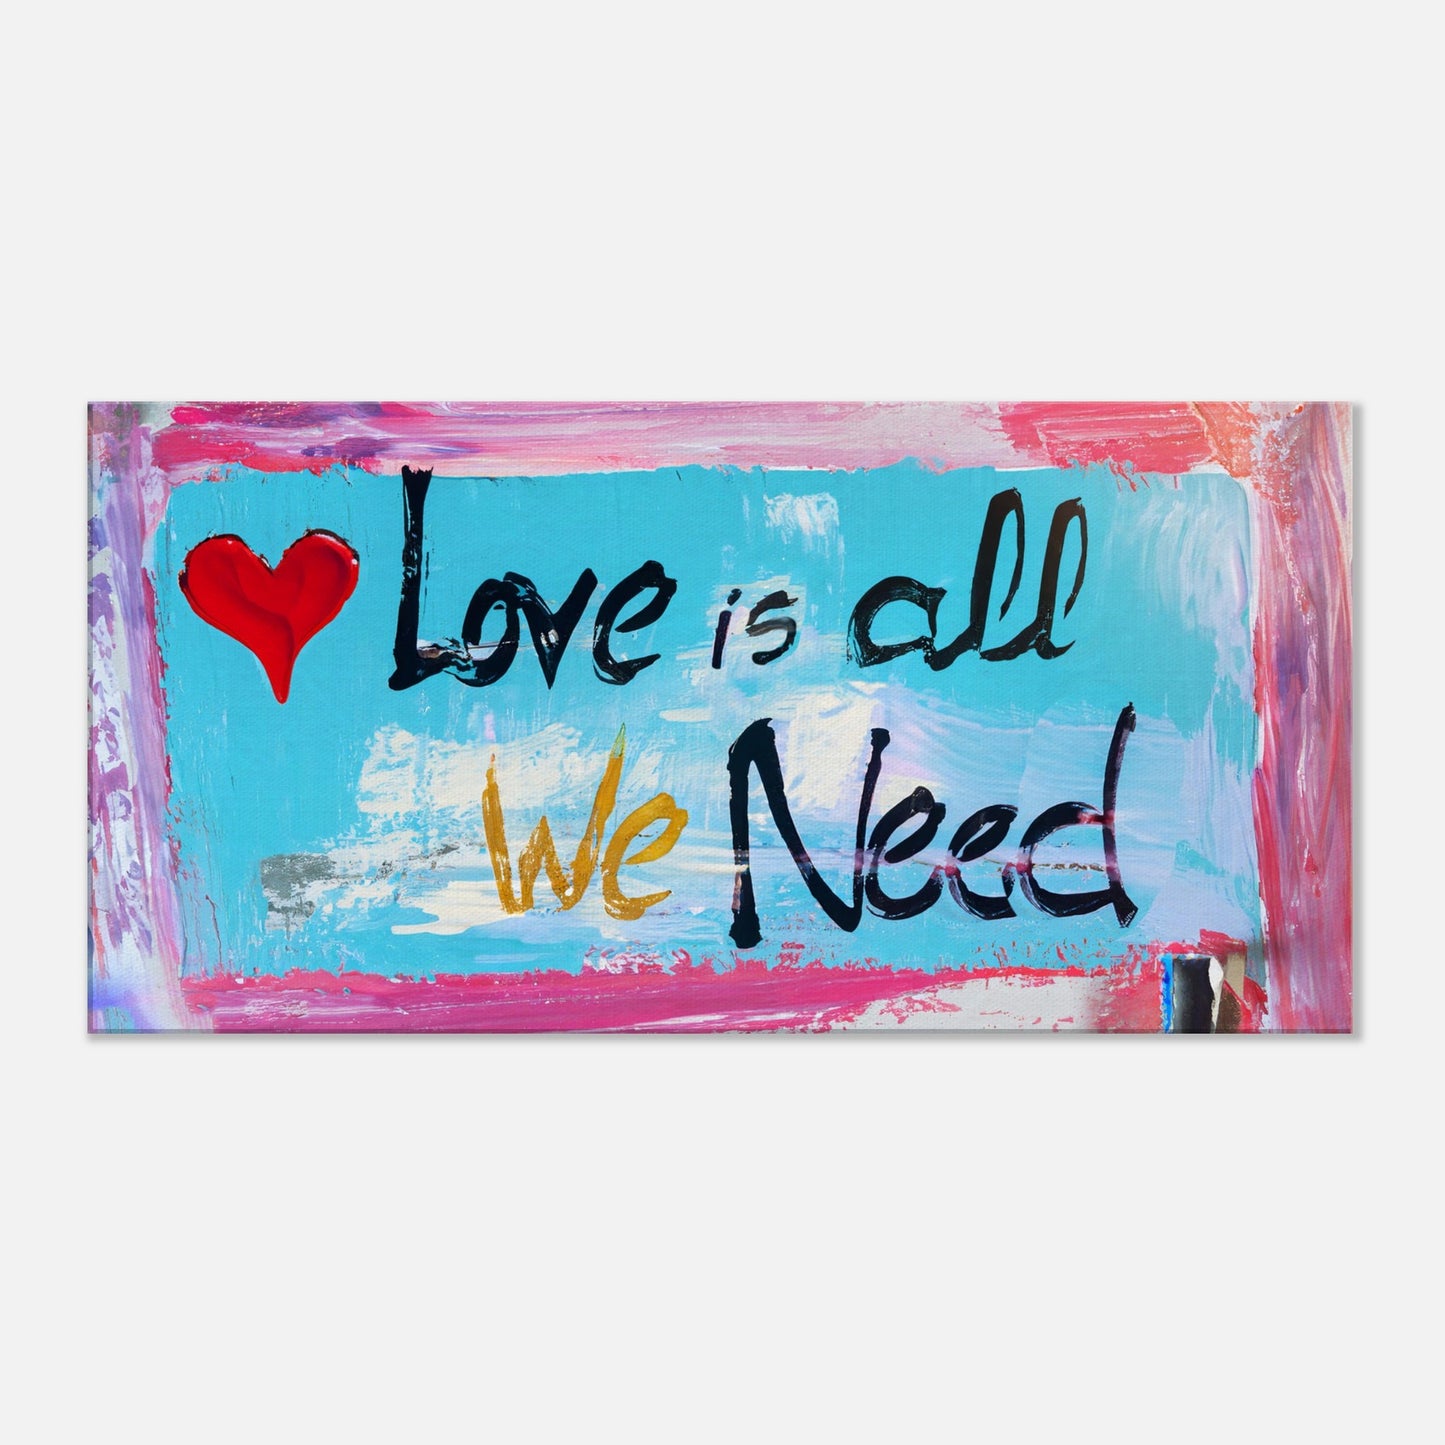 Canvas Print 'Love is all we need' by Posterify Design 50X100cm - Posterify